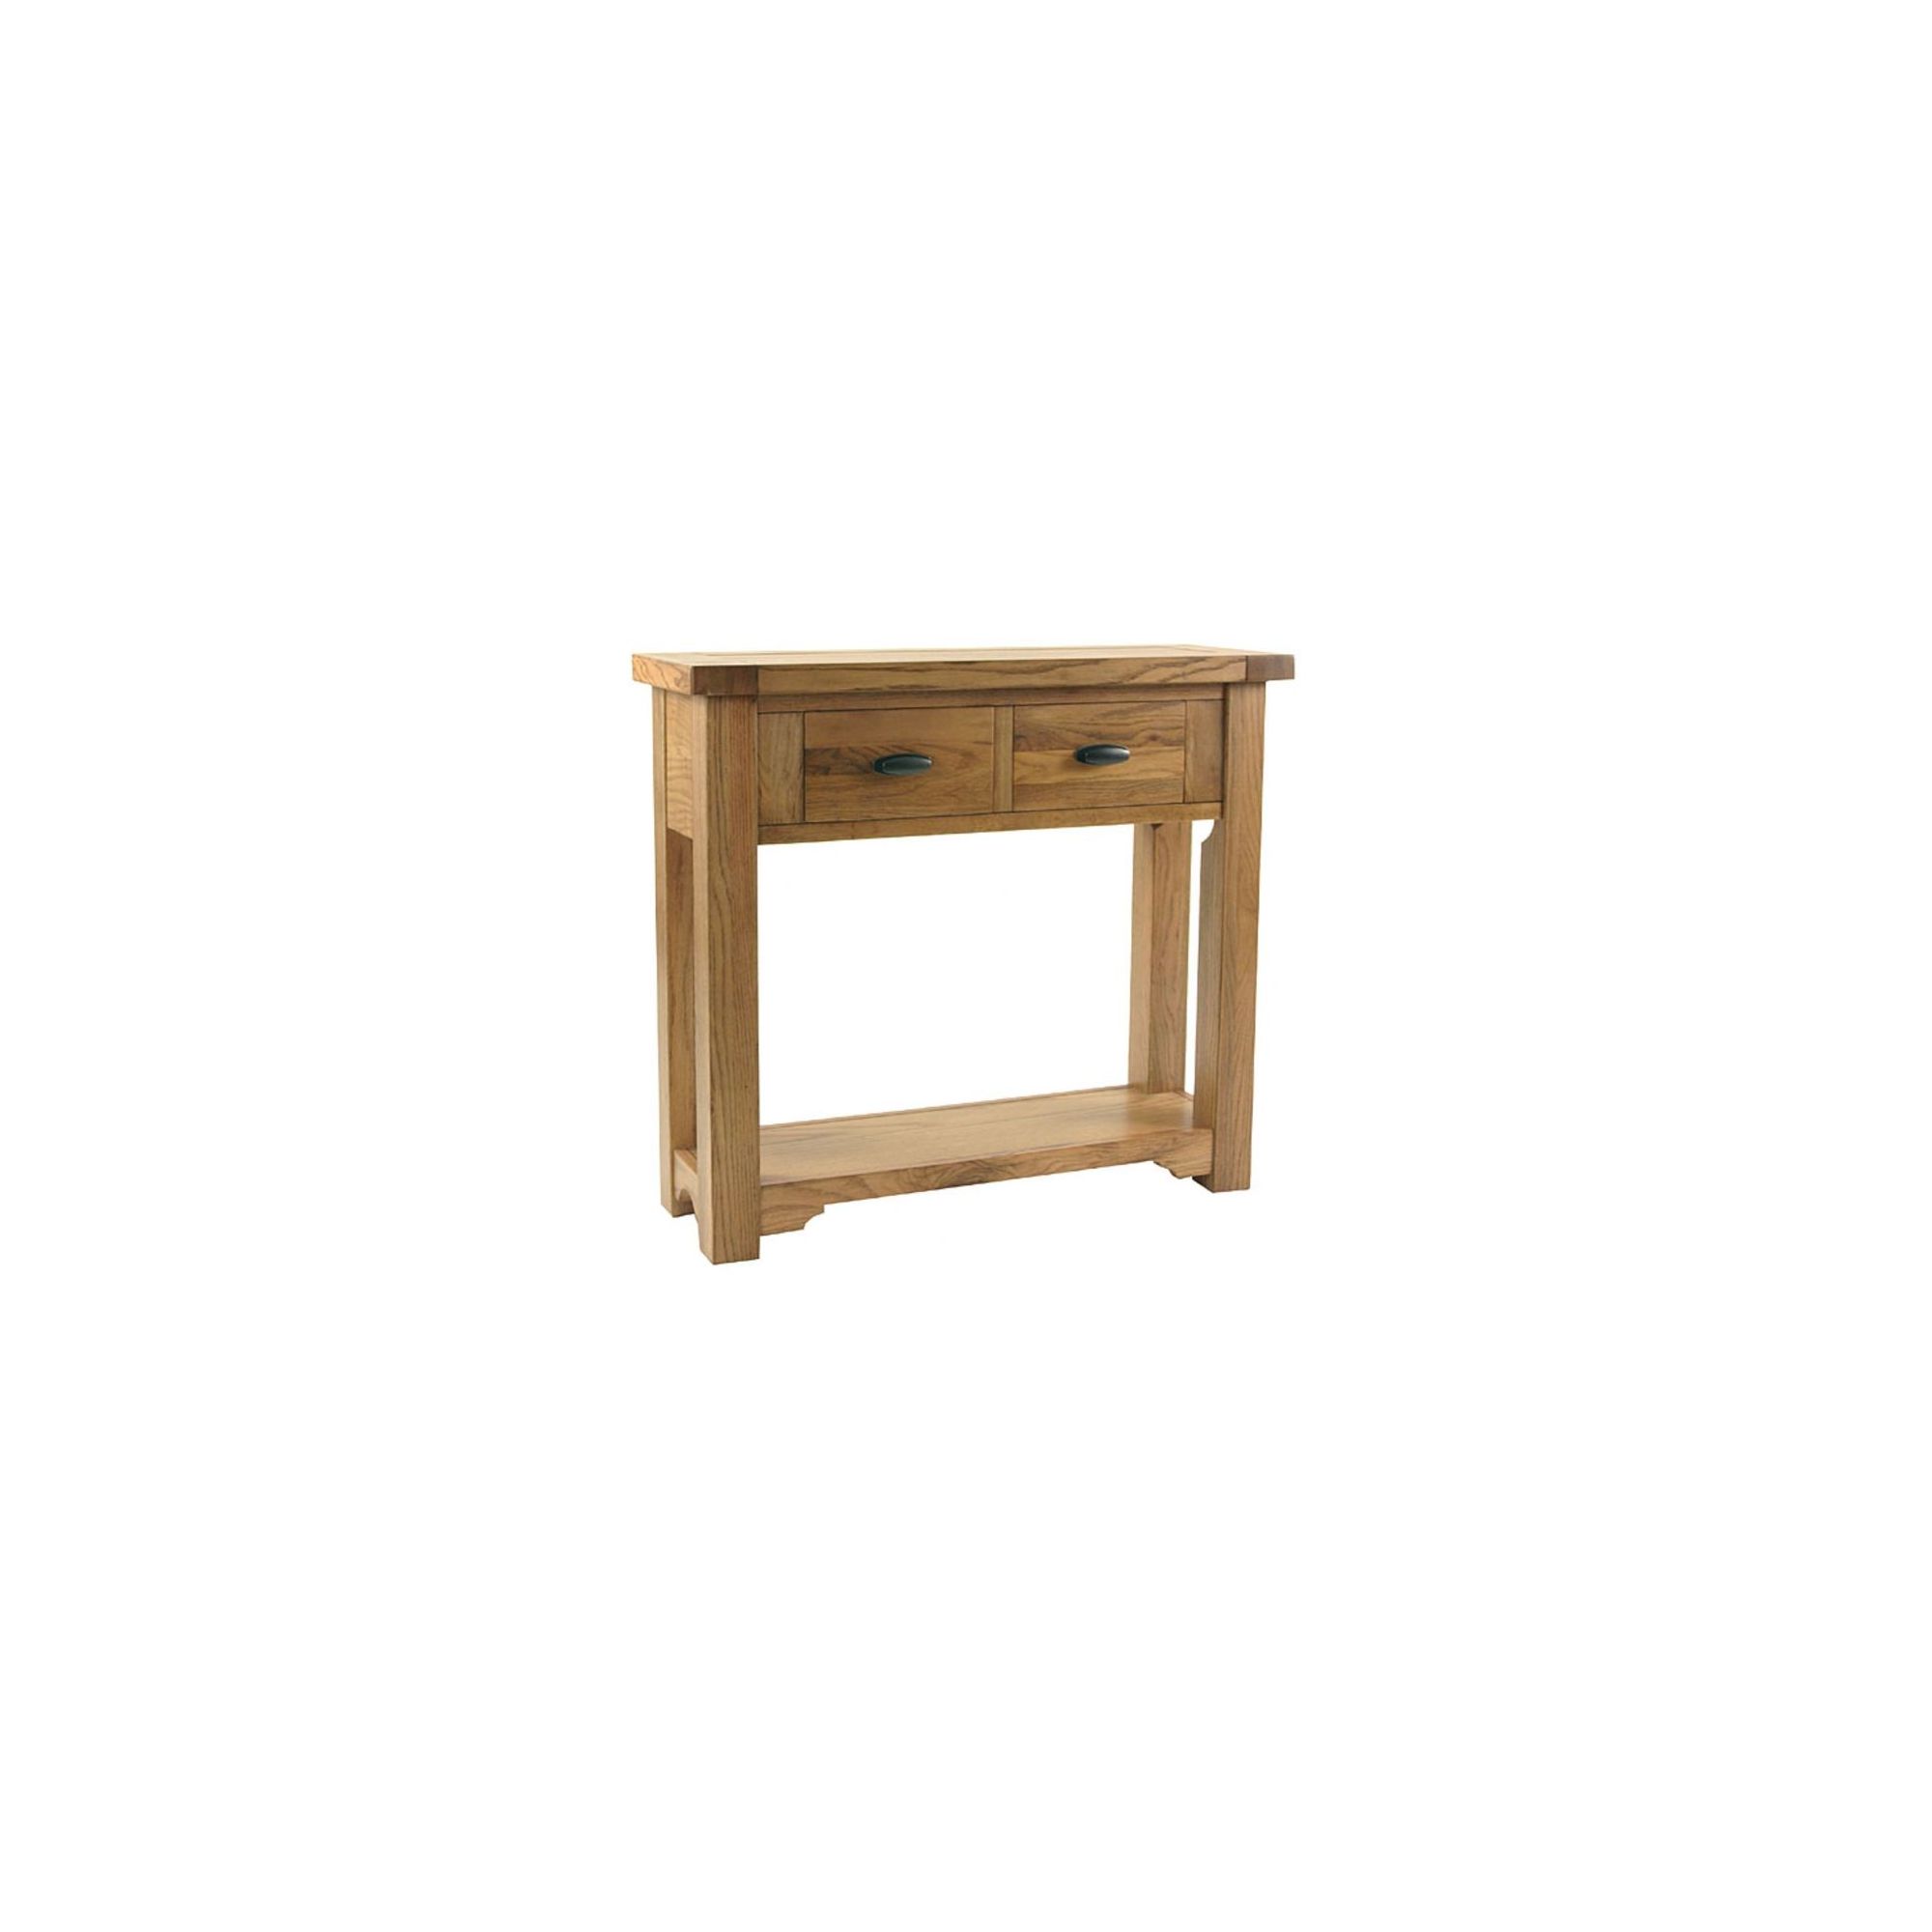 Kelburn Furniture Toulouse Small Console Table in Medium Oak Stain and Satin Lacquer at Tescos Direct